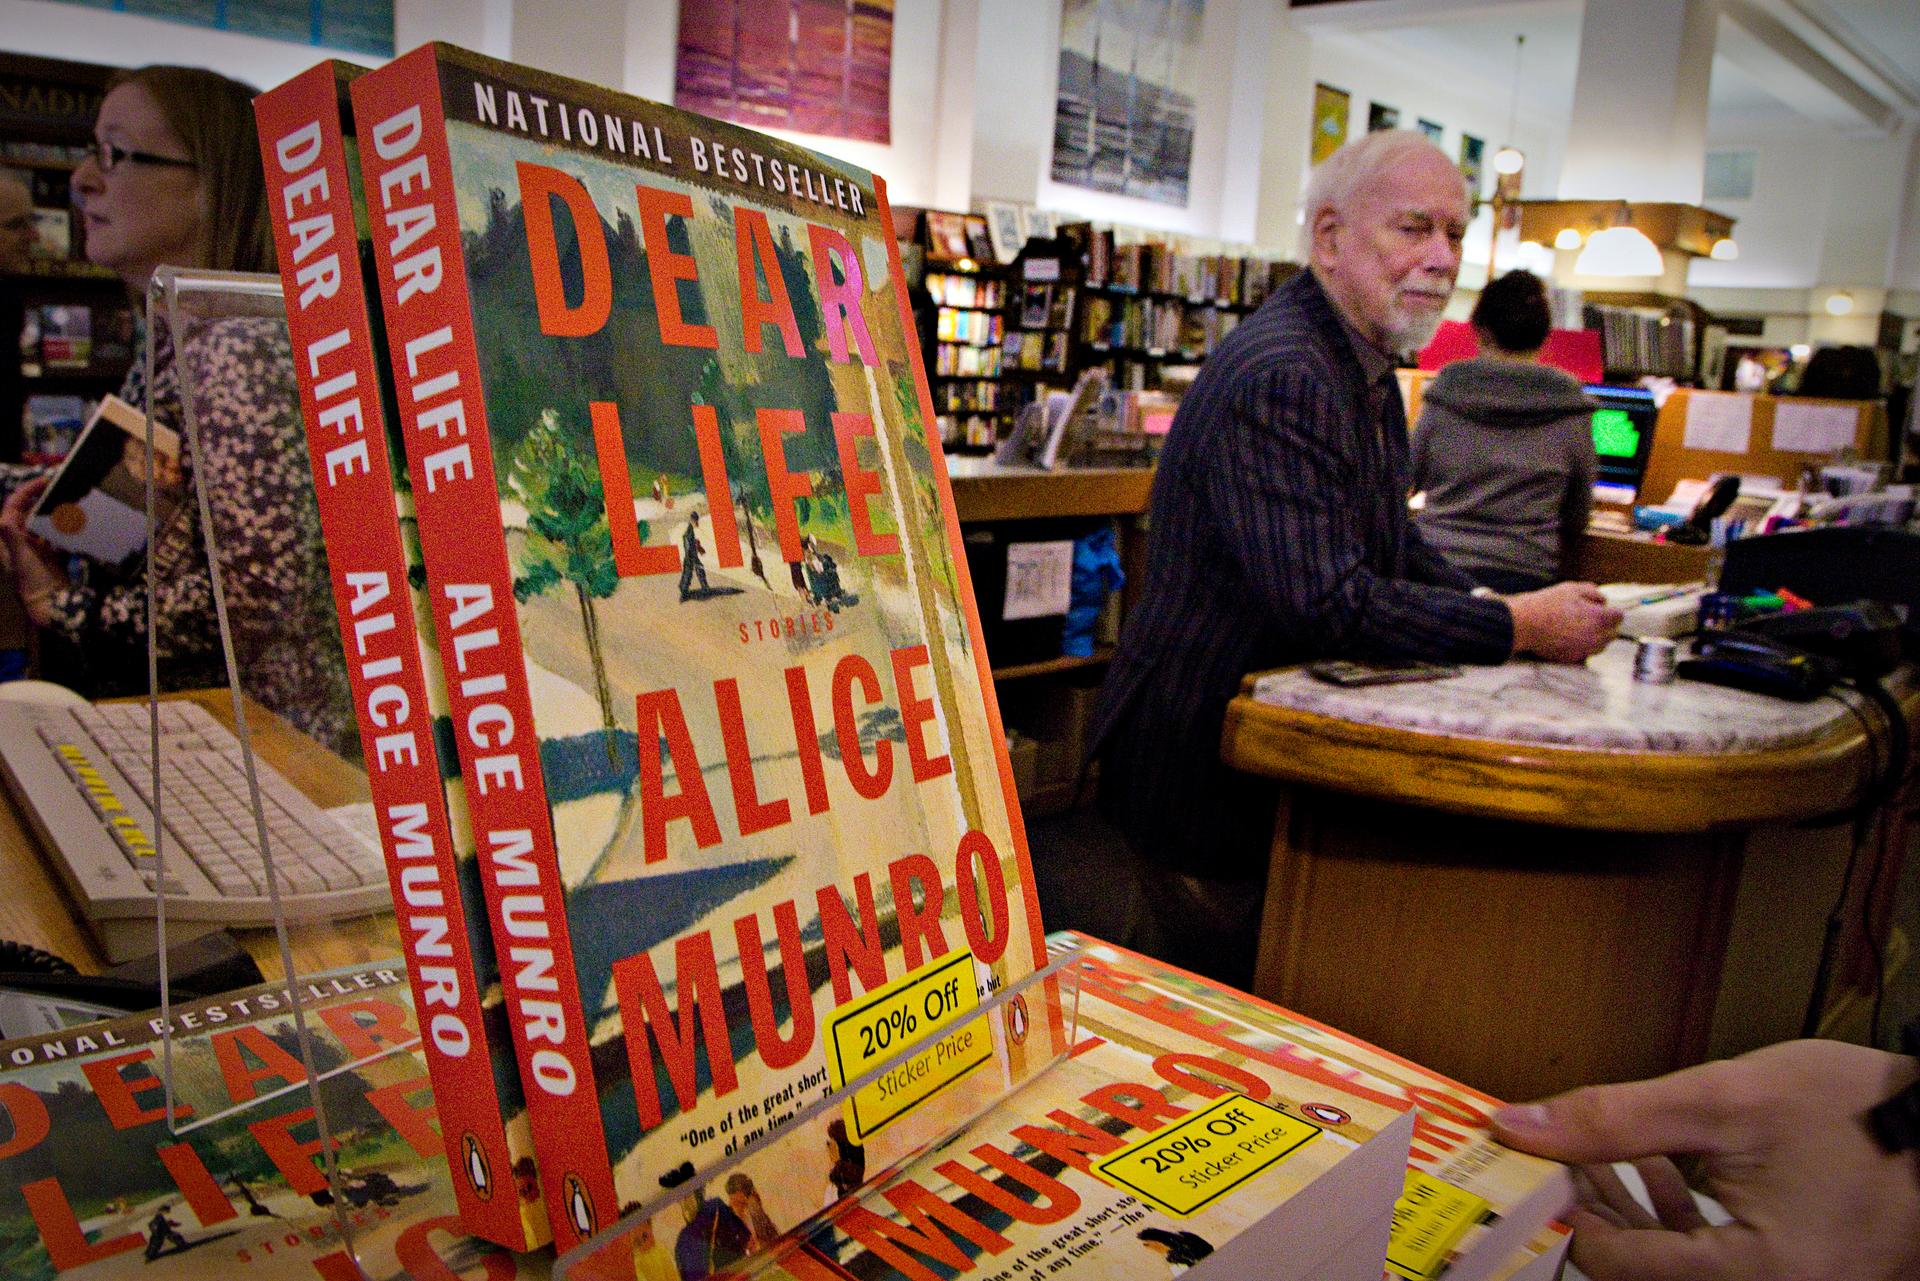 Canadian author Alice Munro's books sit on the bookshelf as her former husband Jim stands at the front counter at Munro's Bookstore in Victoria, British Columbia October 10, 2013.